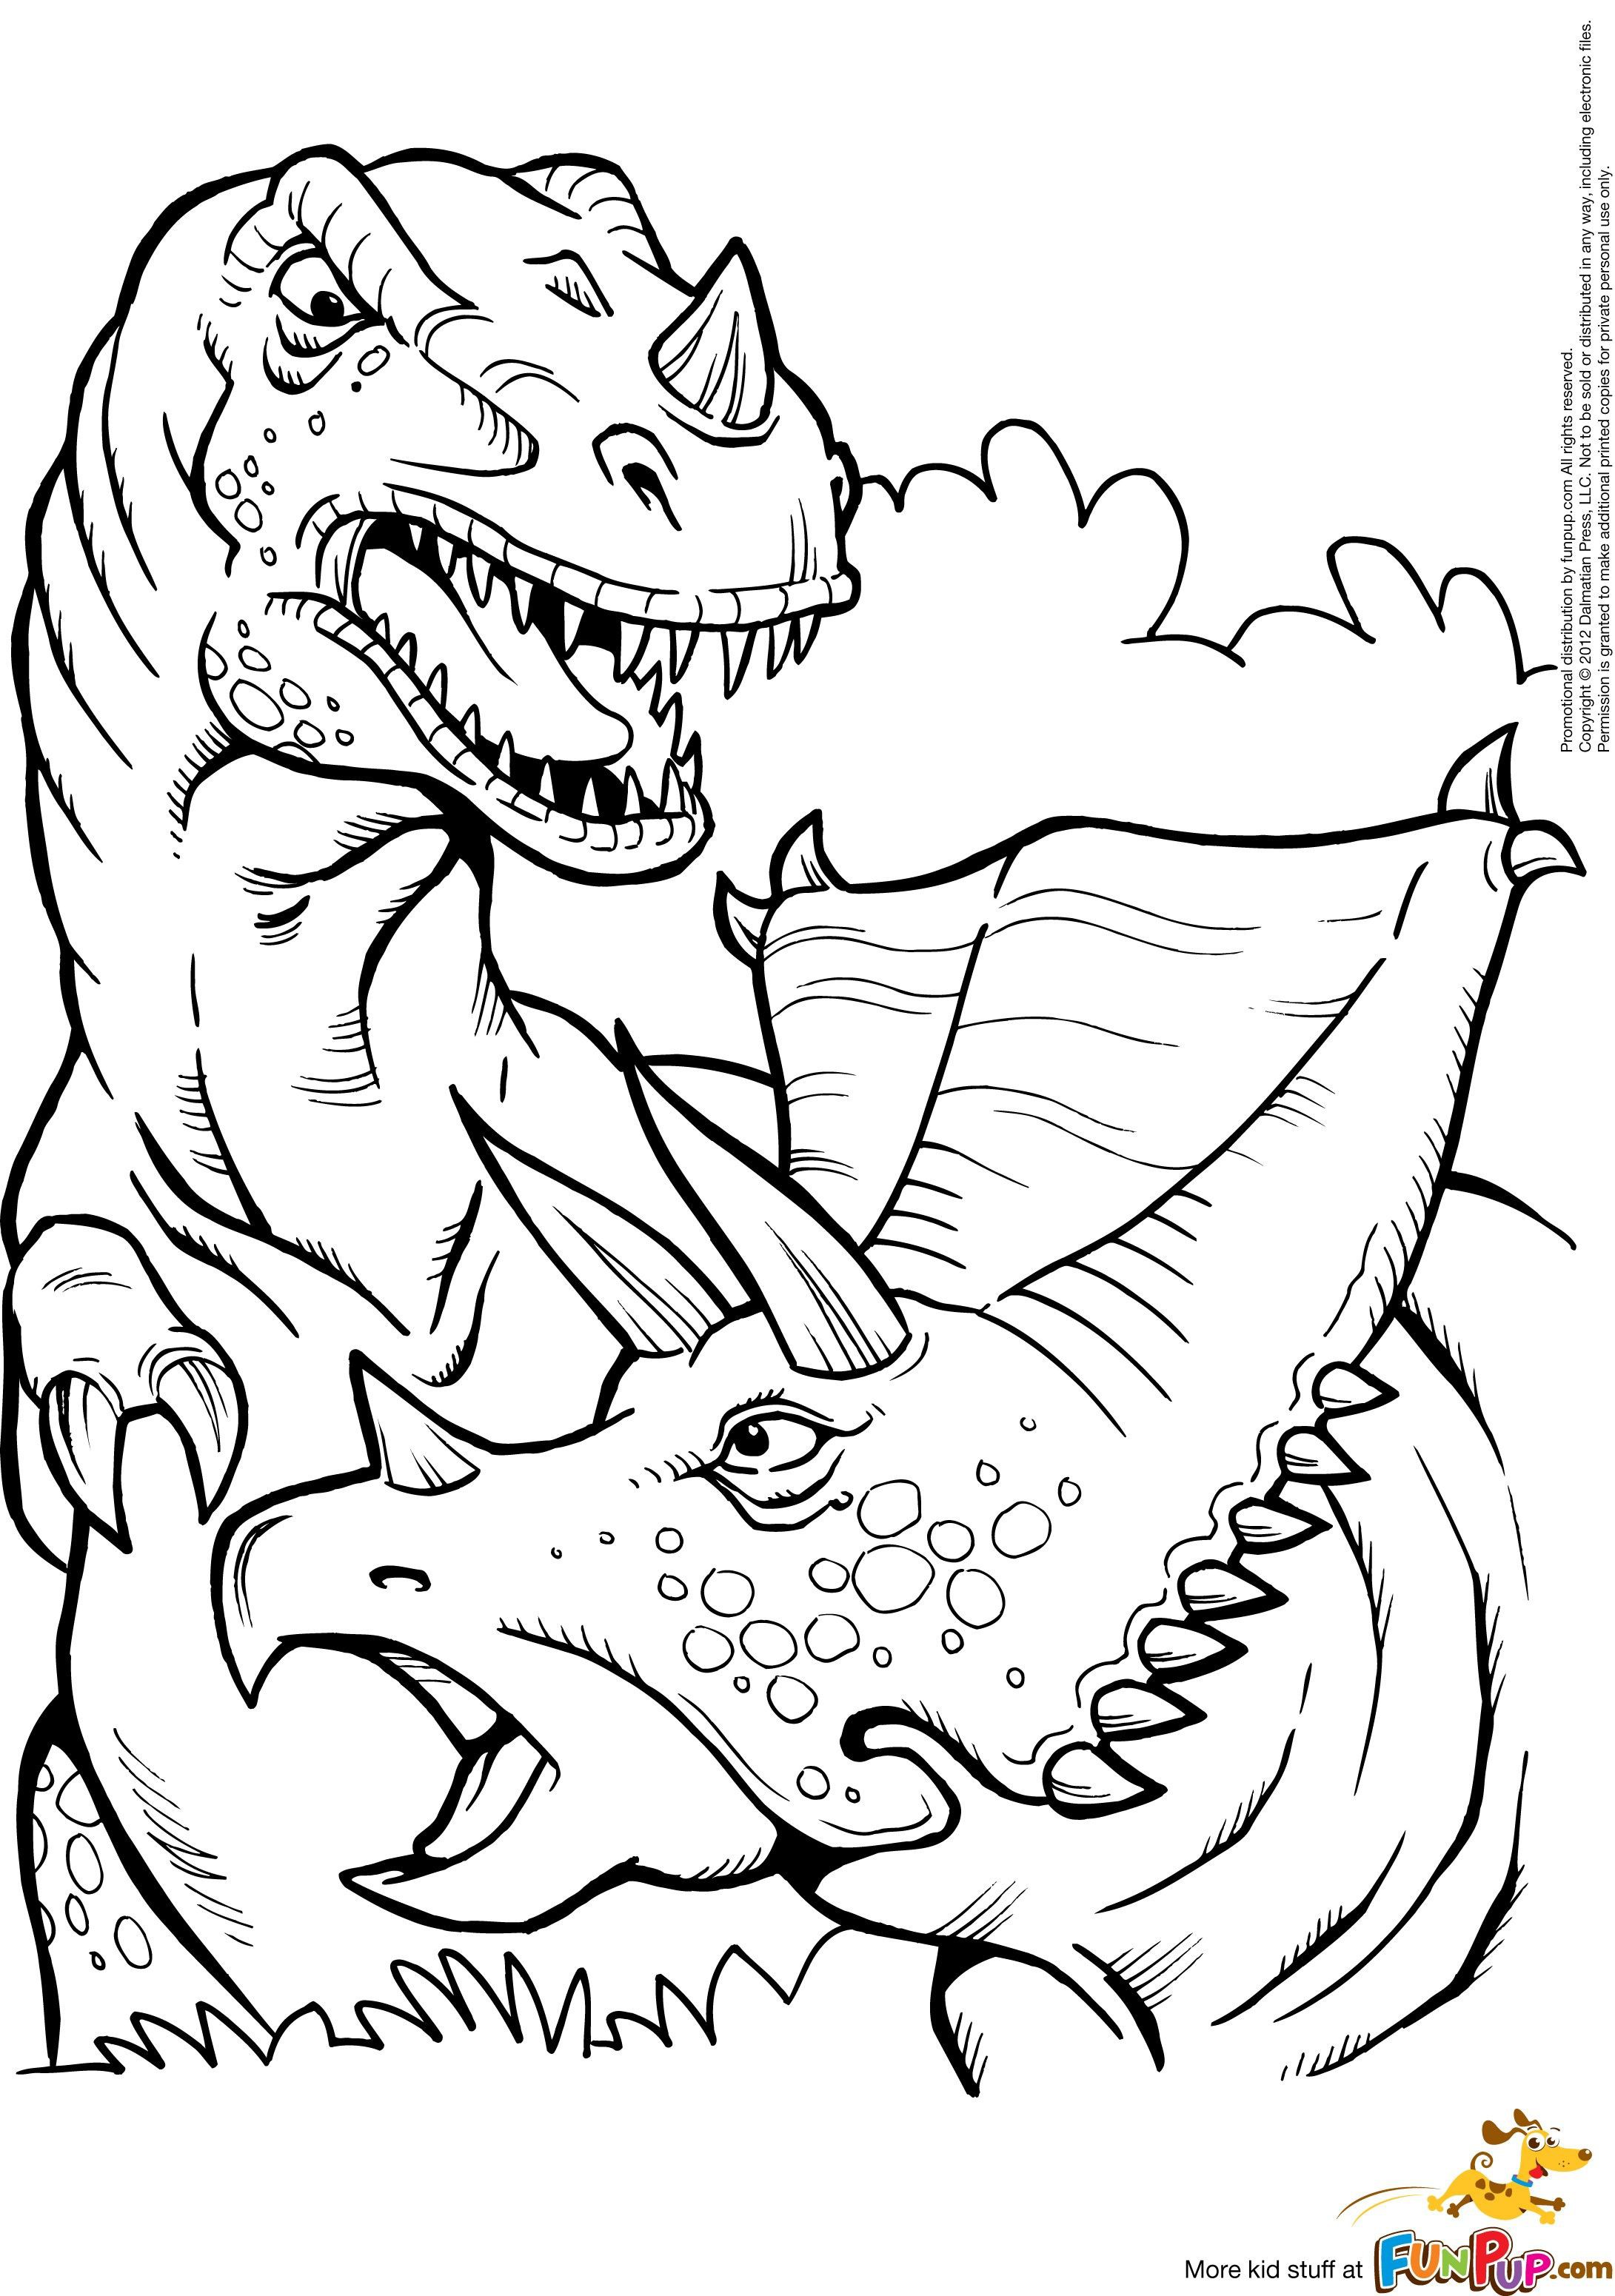 Dinosaur Colouring Pages Uk Wallpaper